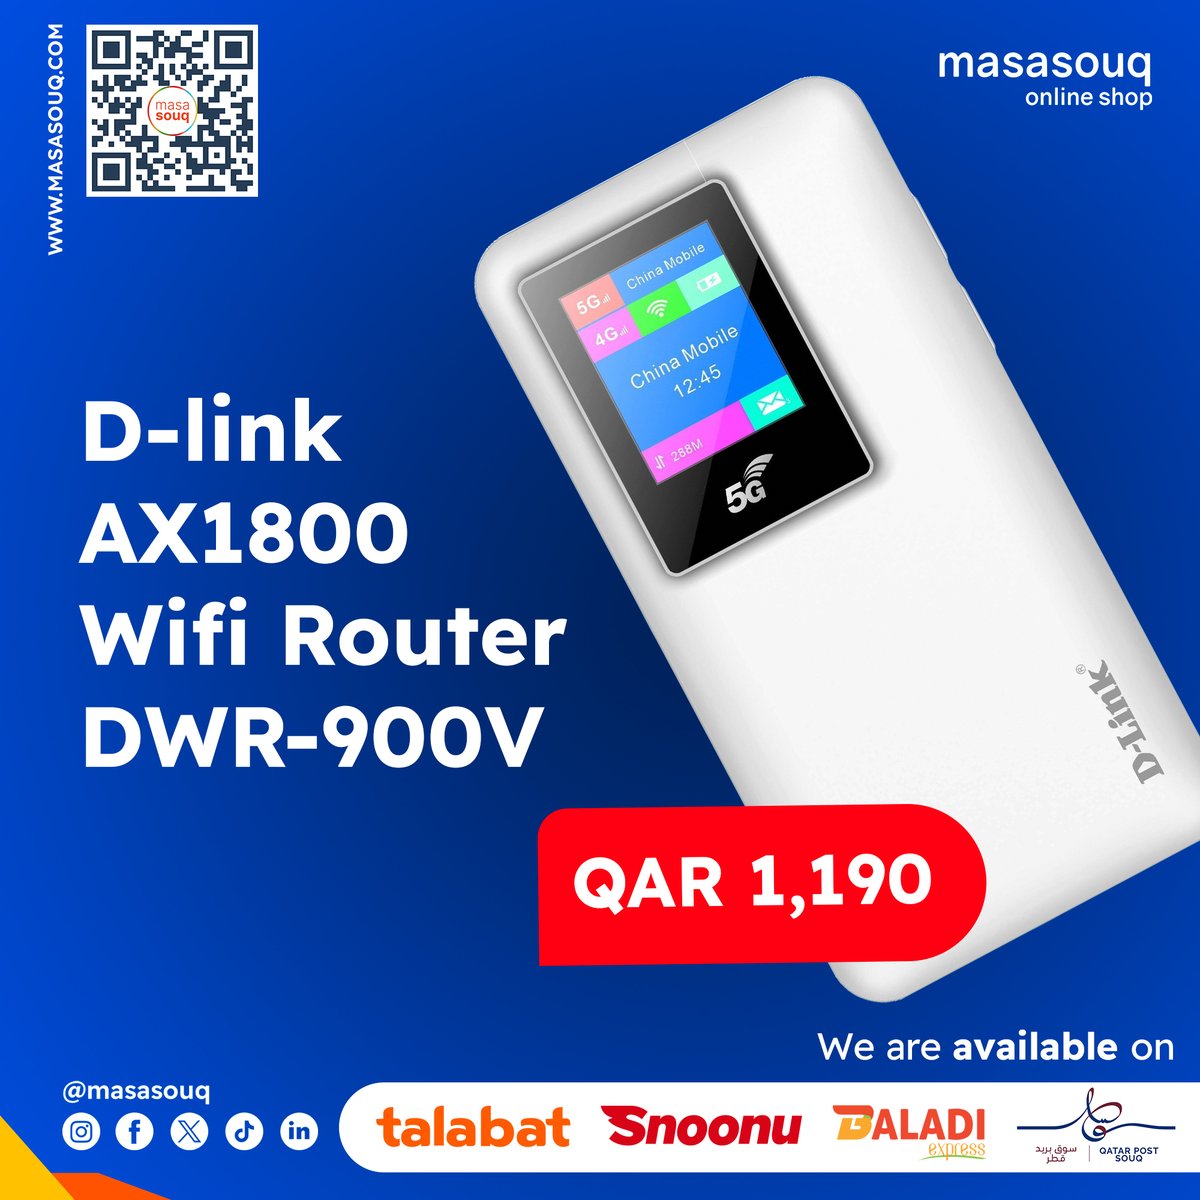 🚀 Supercharge your home internet with the D-link AX1800 Wi-Fi Router (DWR-900V)! Experience lightning-fast speeds and rock-solid connections.  Upgrade now for just QAR1,190  👉 masasouq.com/d-link-ax1800-…  #wifi #router #dlink #speed #internet #masasouq